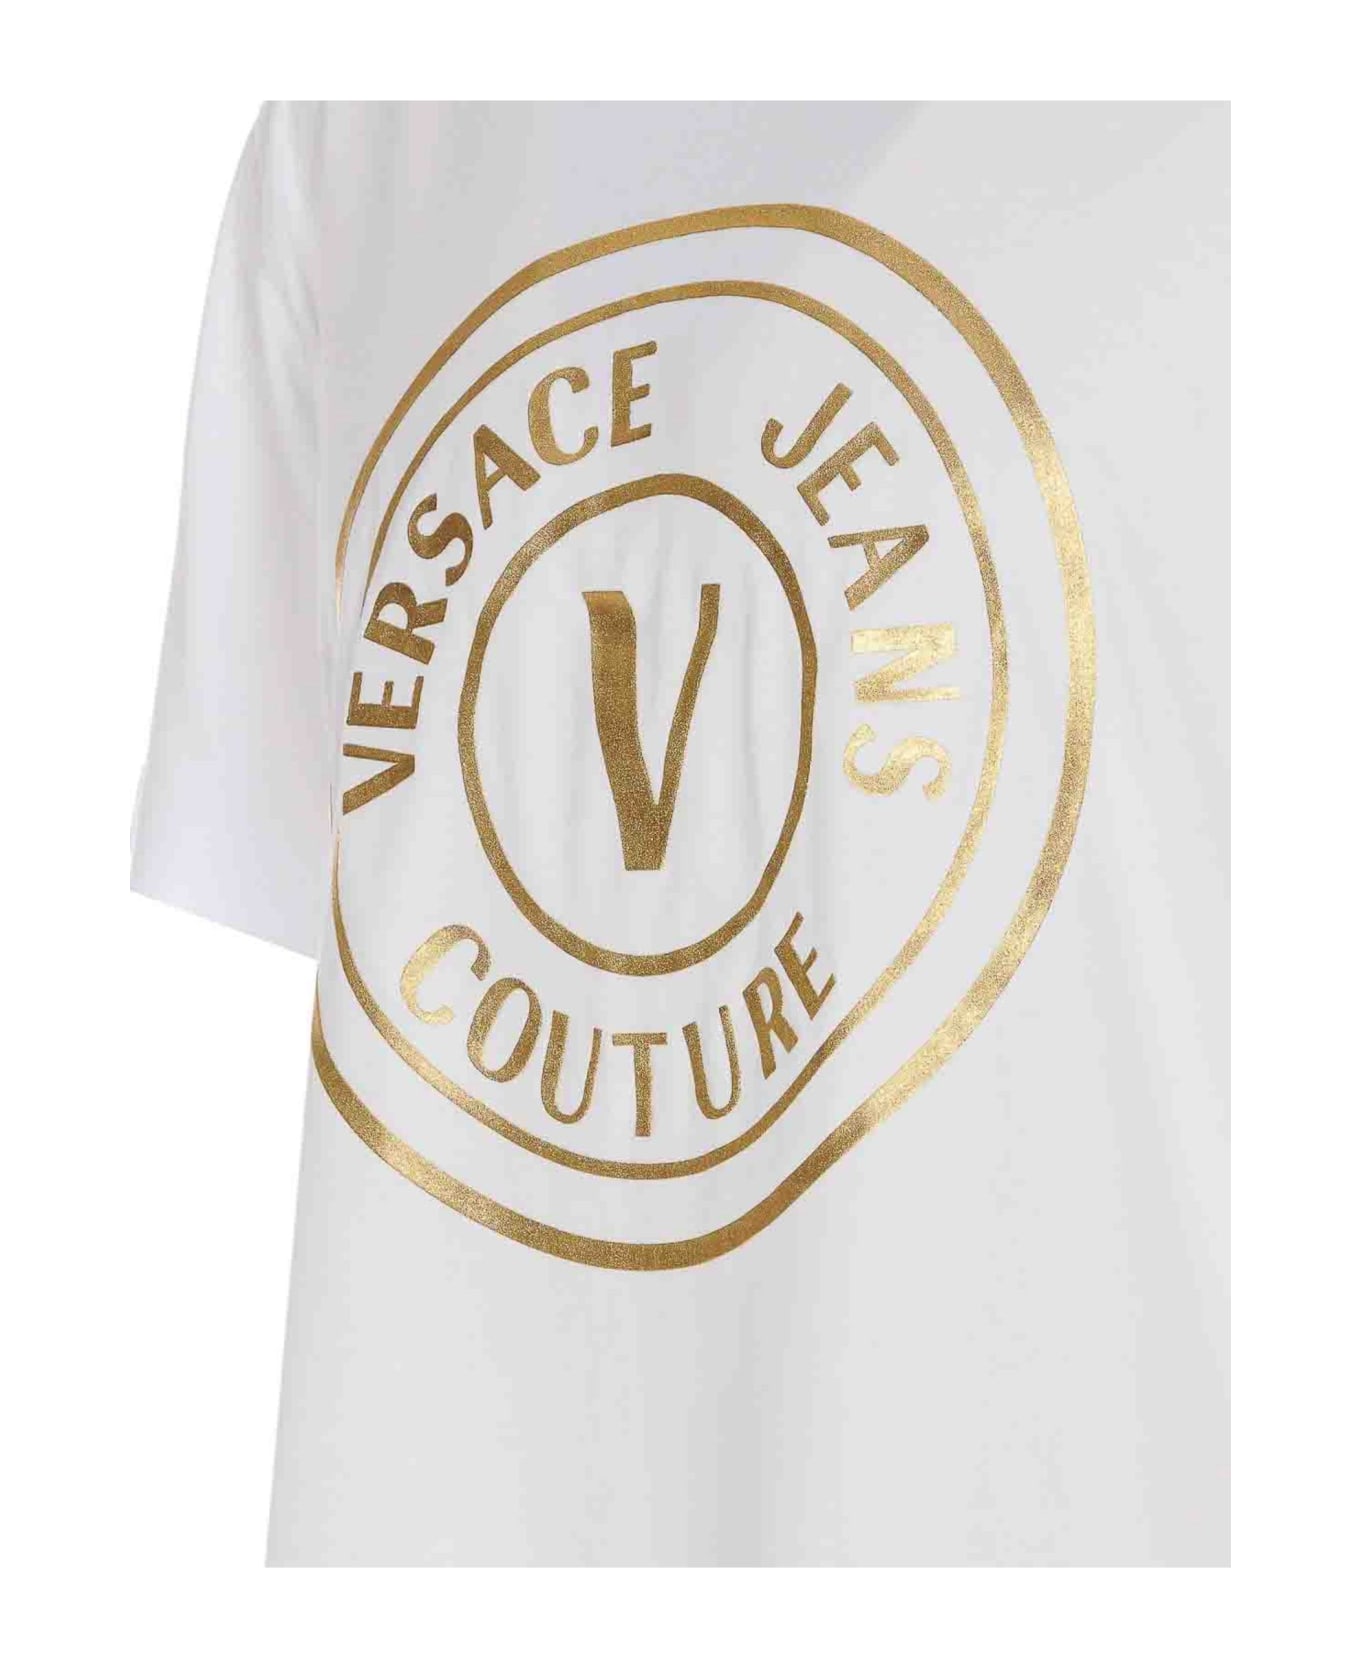 Versace Jeans Couture T-shirt - White gold